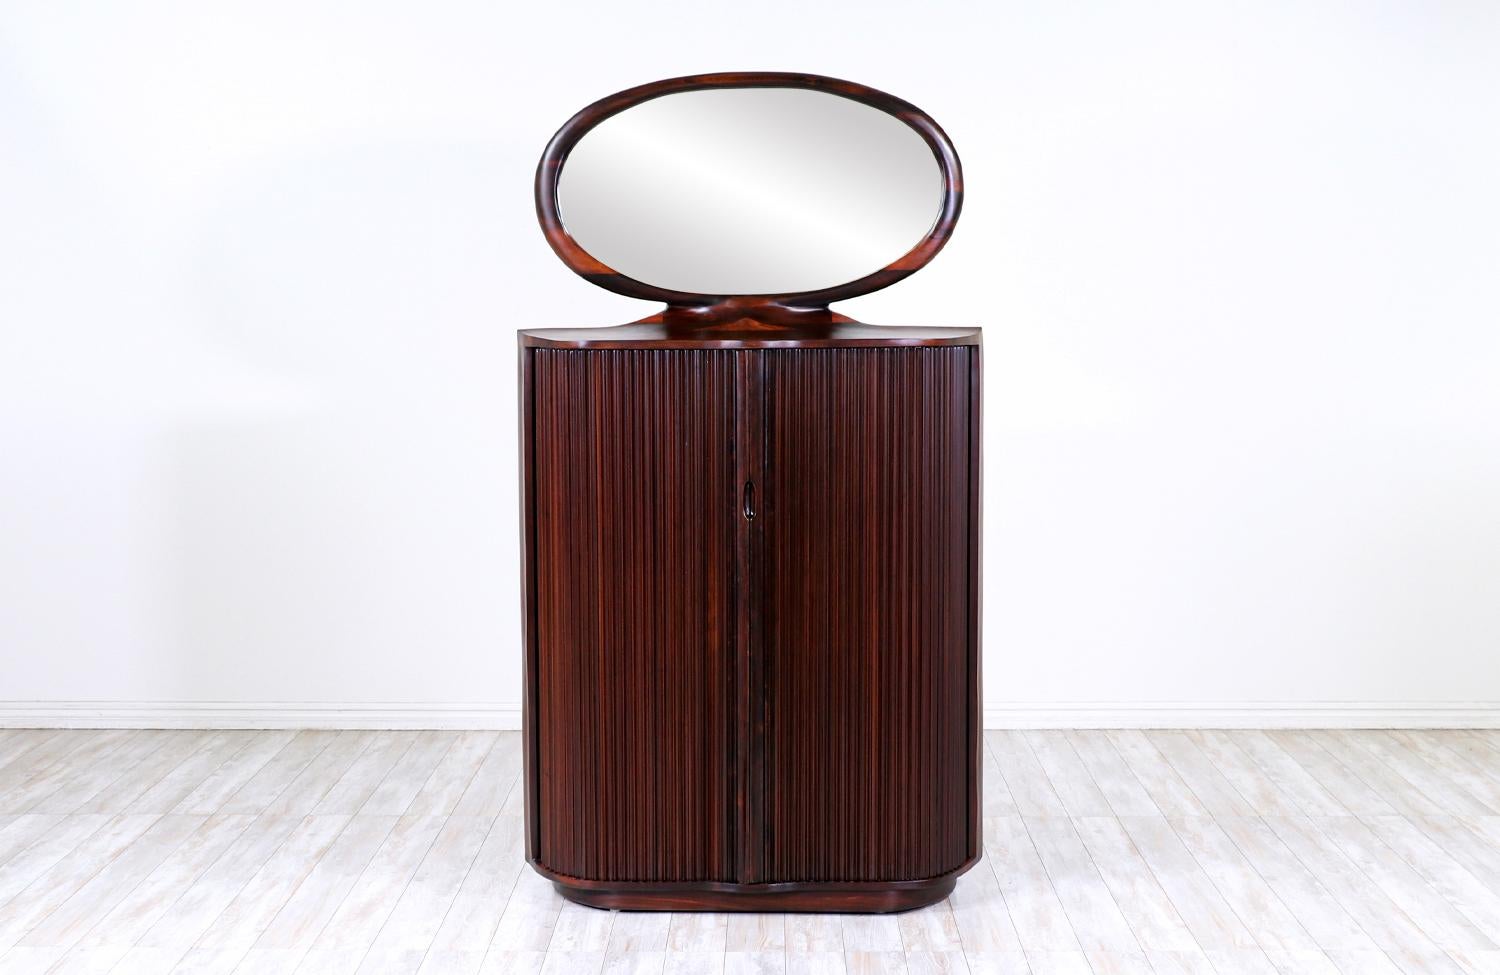 Studio craft solid rosewood tambour-door bachelor's chest of drawers.

________________________________________

Transforming a piece of Mid-Century Modern furniture is like bringing history back to life, and we take this journey with passion and